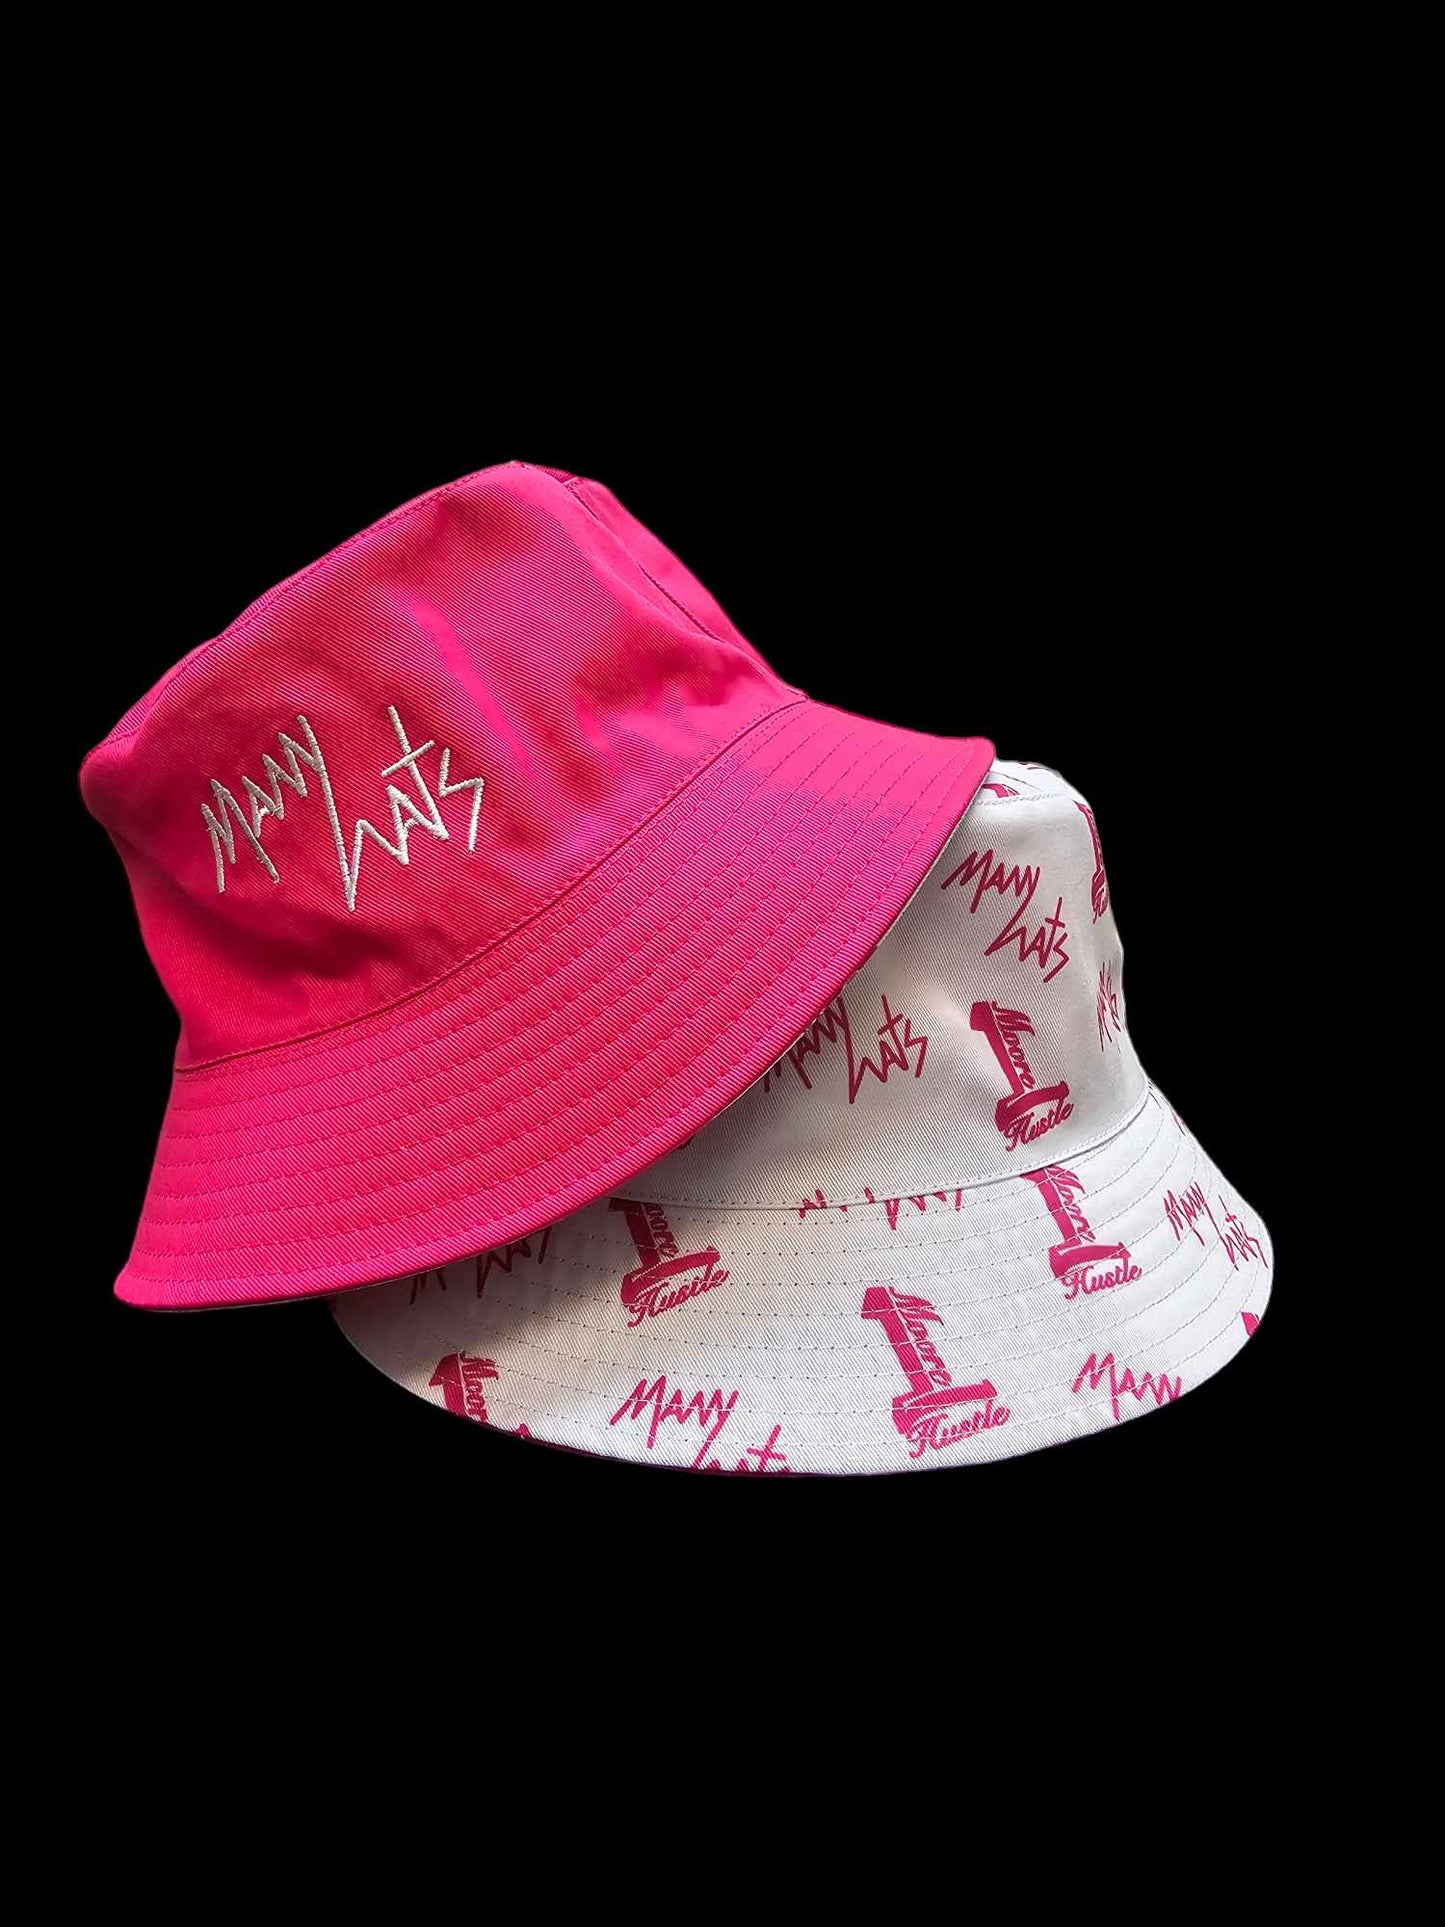 Bucket Hat ( Many Hats Collection )